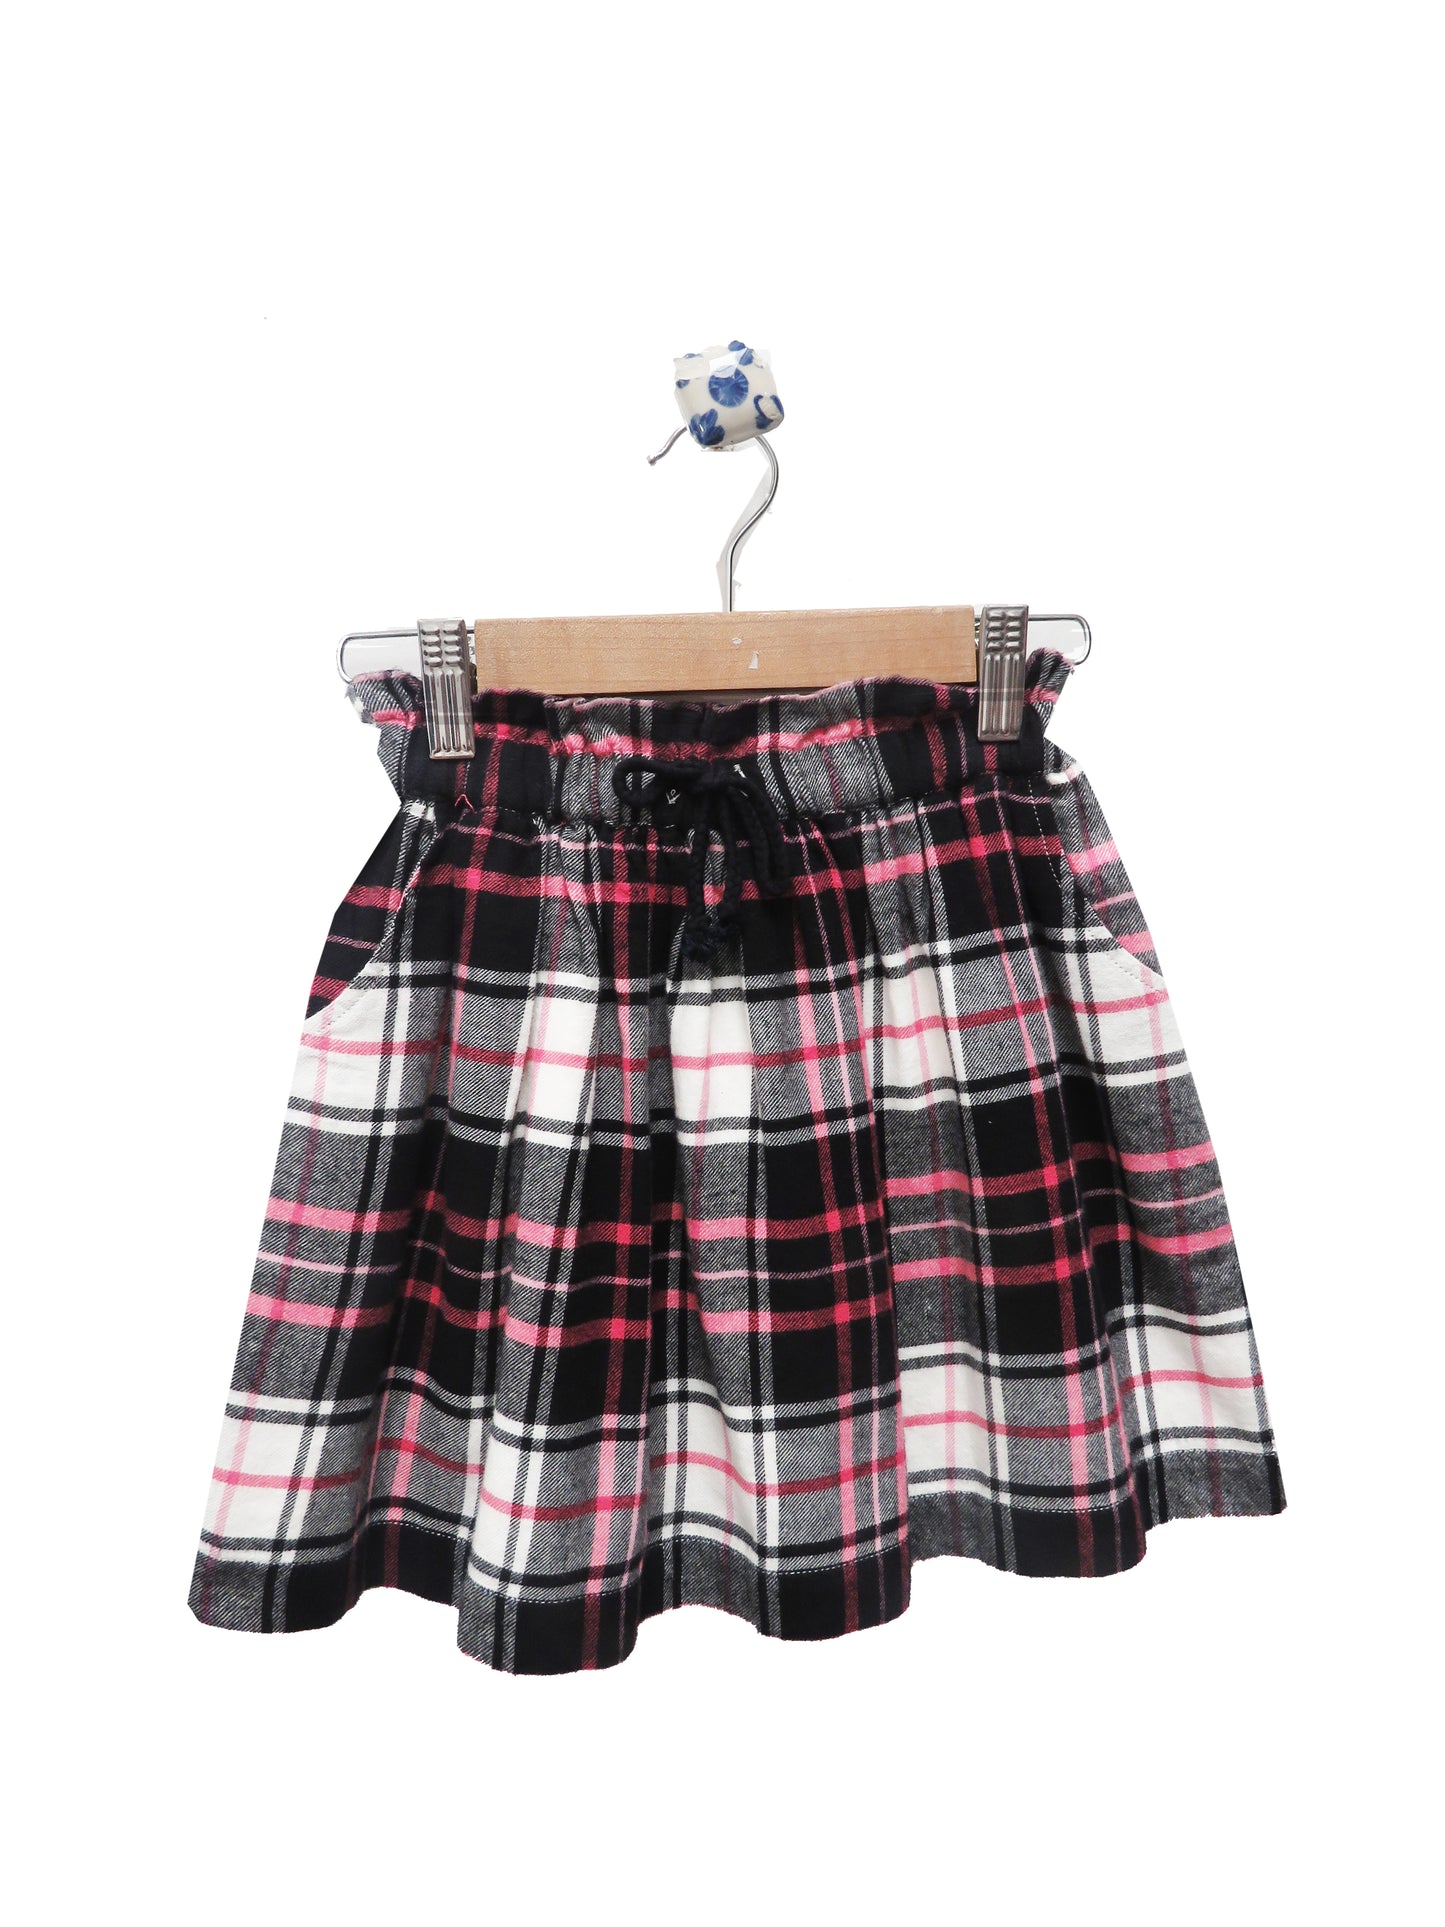 PLAID SKIRT WITH SIDE POCKETS